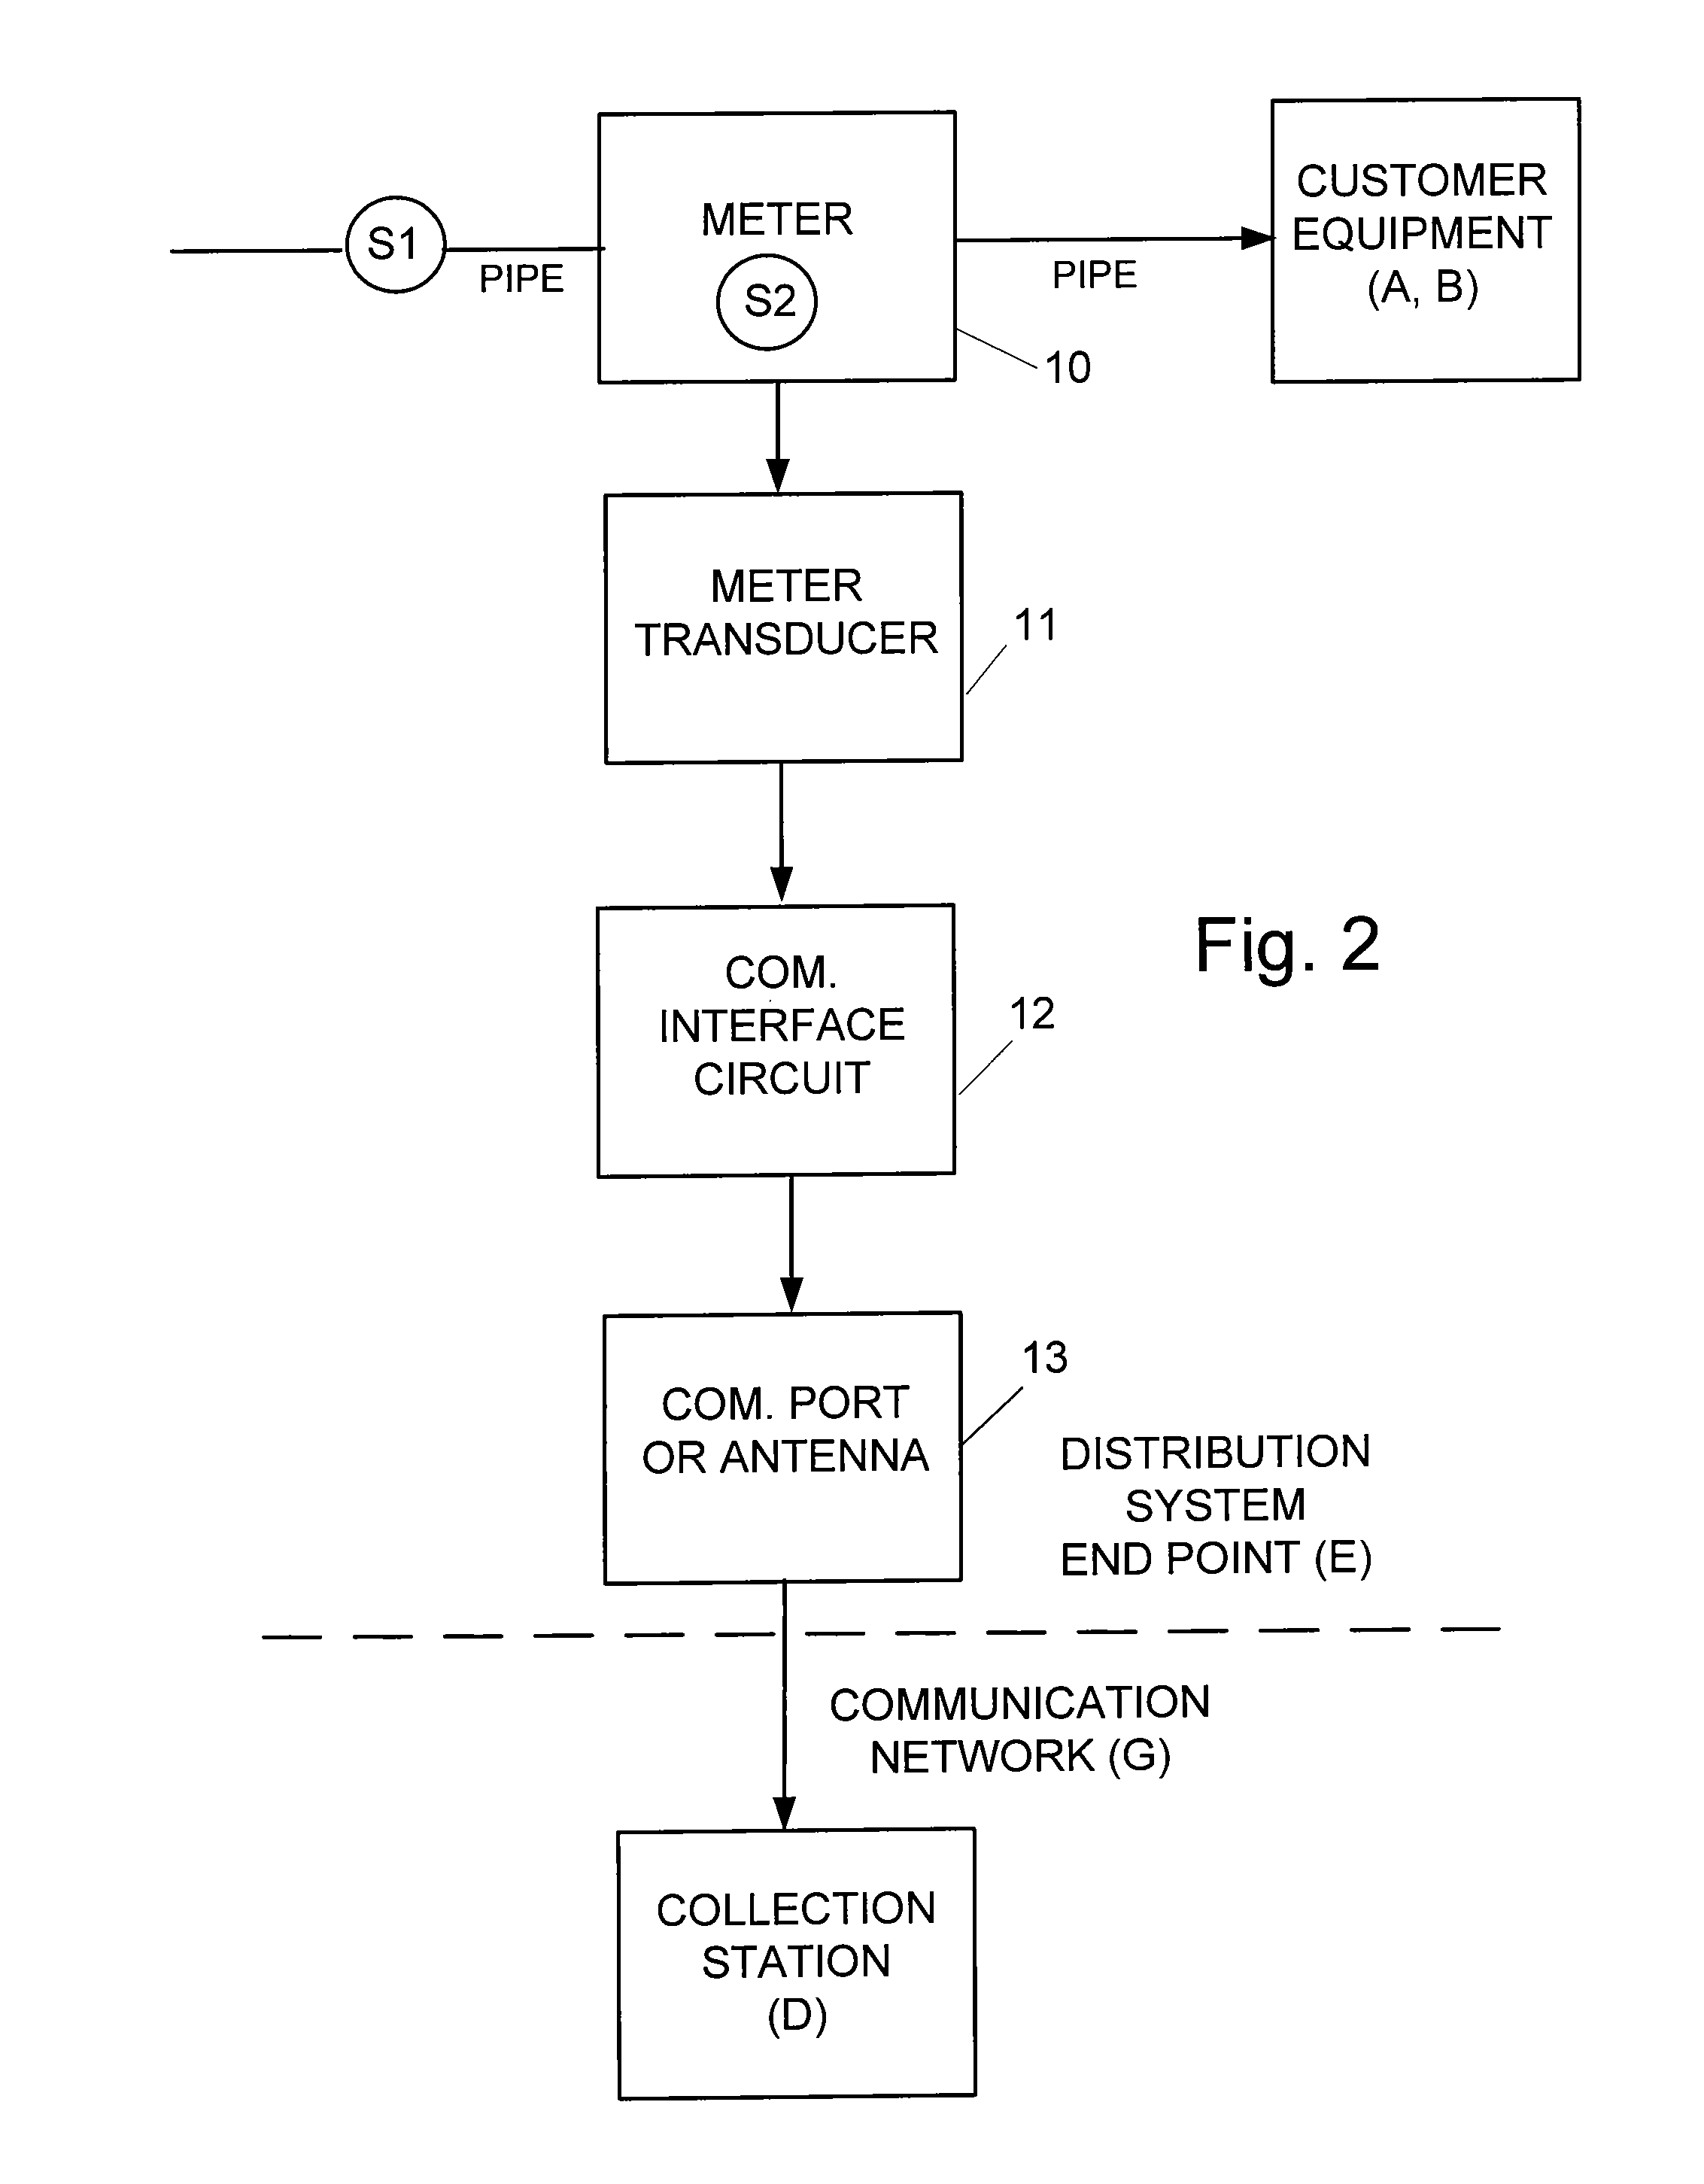 Apparatus and Method for Measuring Water Quality in a Water Meter Data Collection System